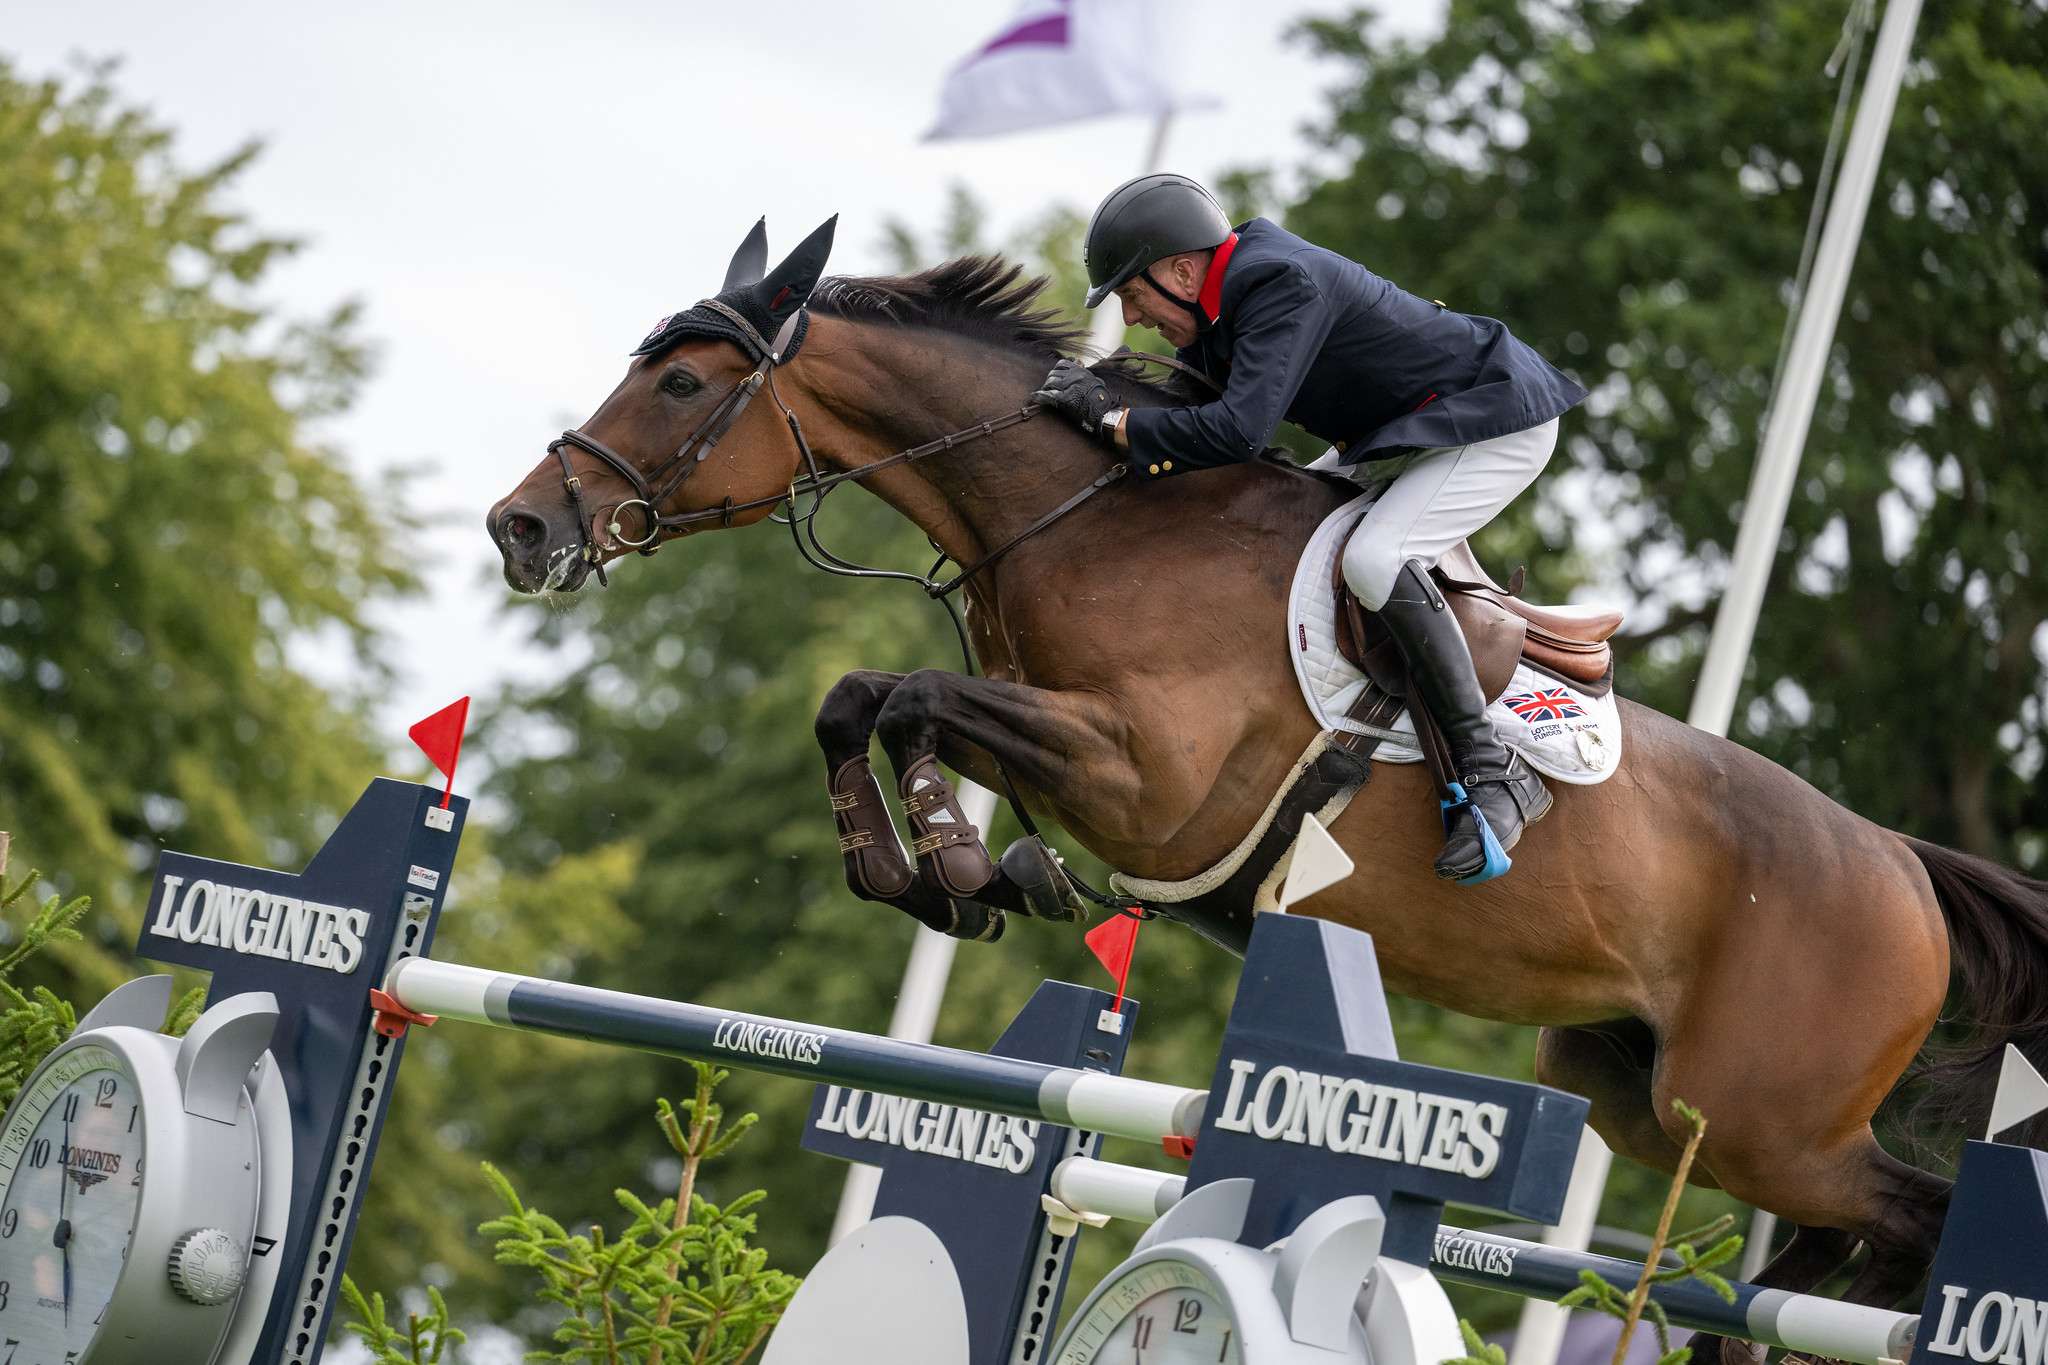 John WHITAKER (GBR) & EQUINE AMERICA UNICK DU FRANCPORT compete in the LONGINES FEI Jumping Nations Cupâ¢ of Great Britain - Longines Royal International Horse Show - Hickstead, West Sussex, United Kingdom - 28 July 2023
